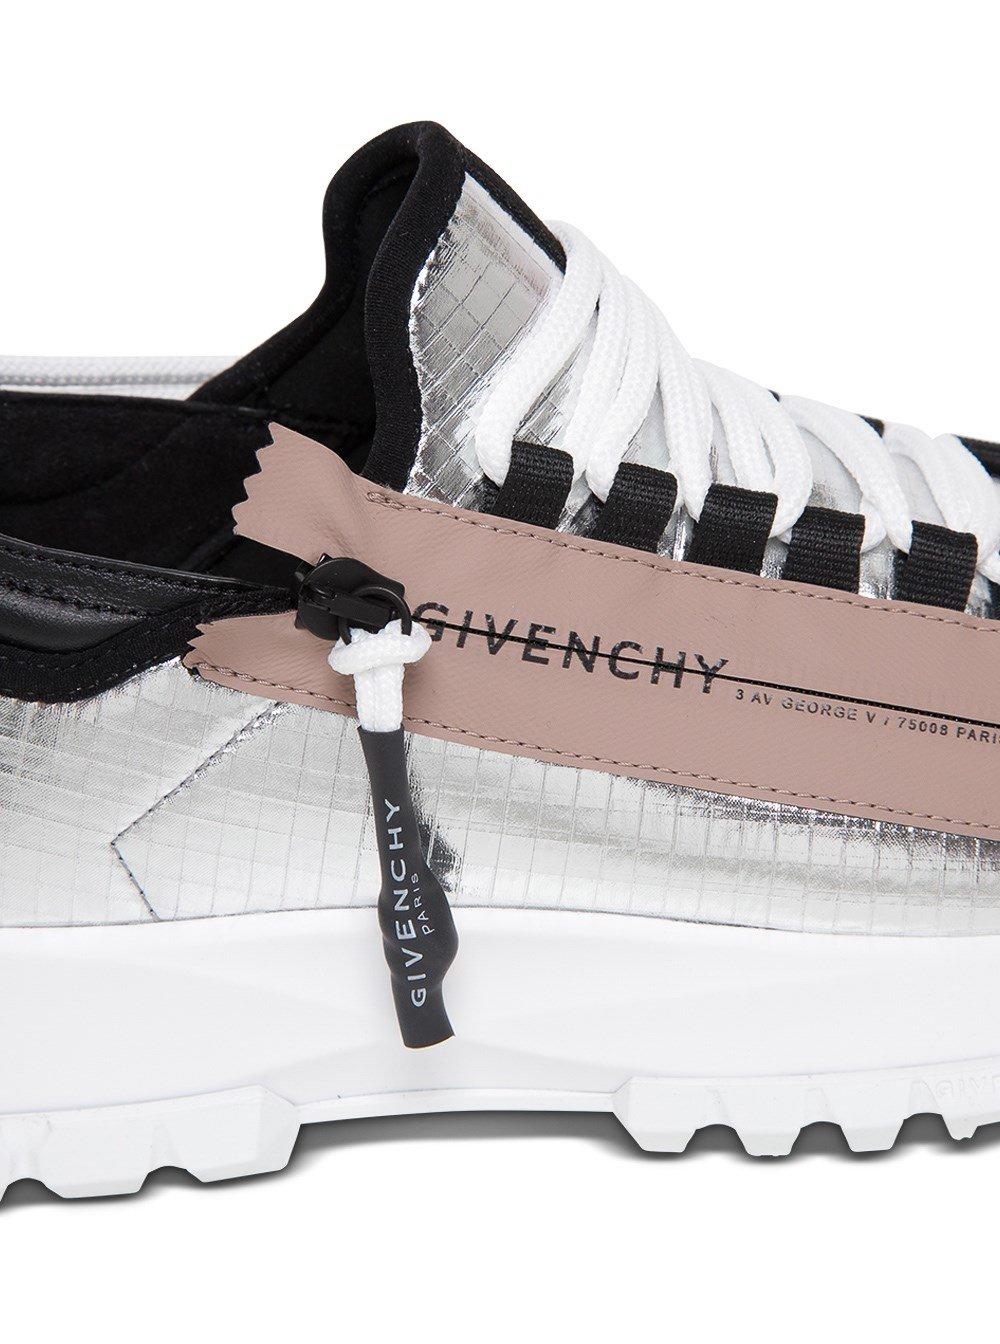 Givenchy Spectre Low Runners Sneakers In Metalized Ripstop With Zip | Lyst